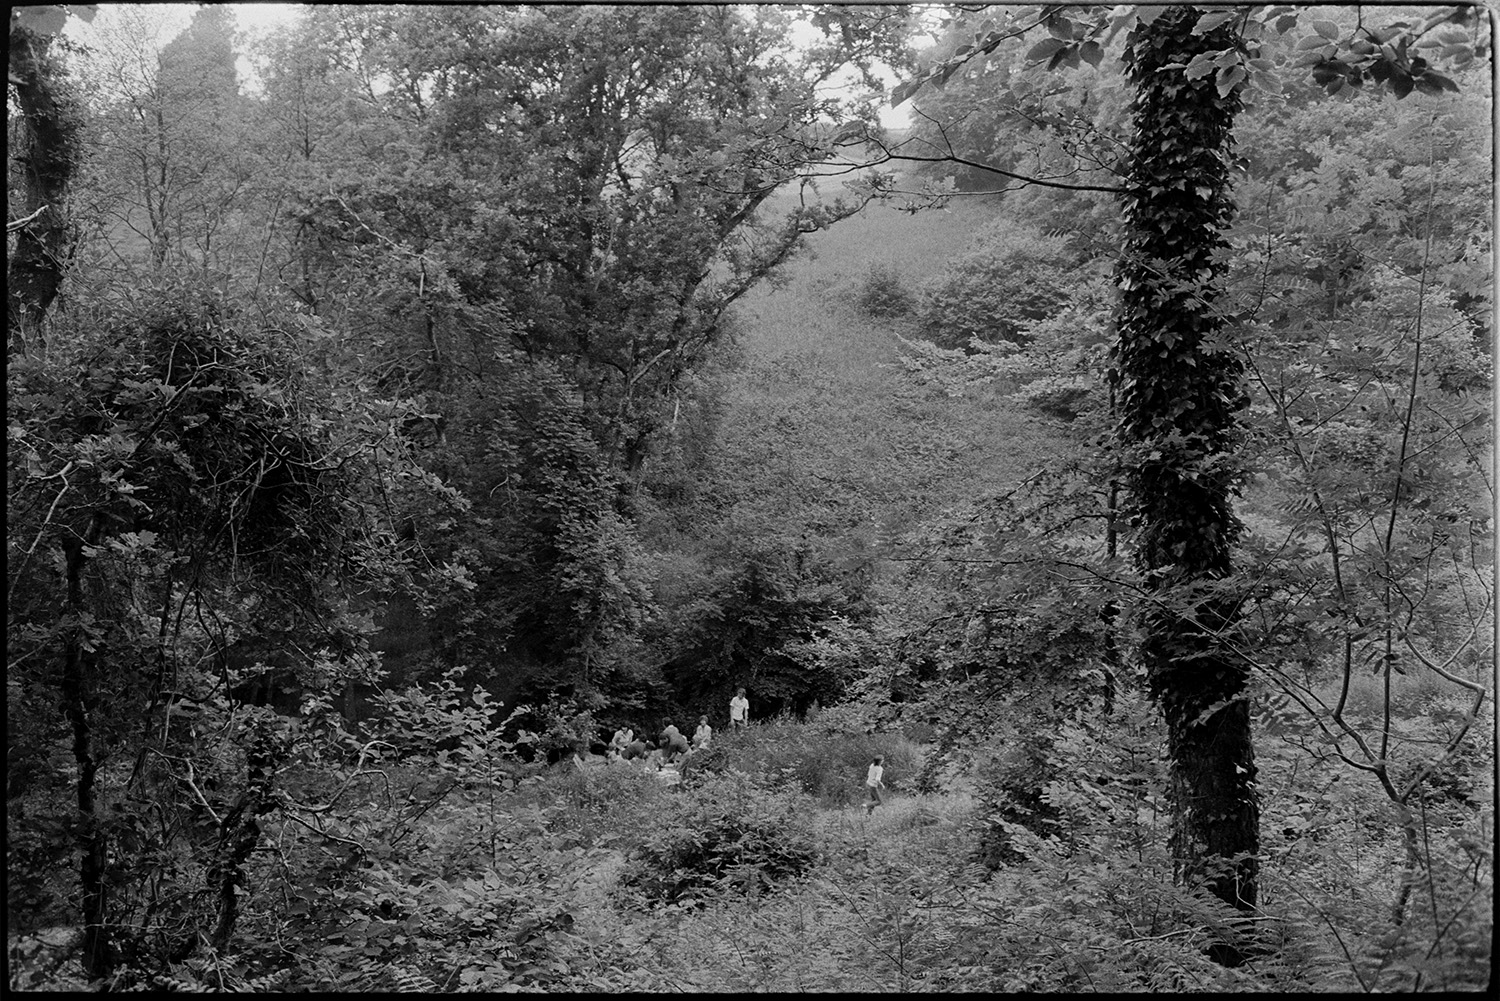 People picnicking in wood beside stream. 
[Adults and children having a picnic in a small clearing by a stream in Dolton Woods.]